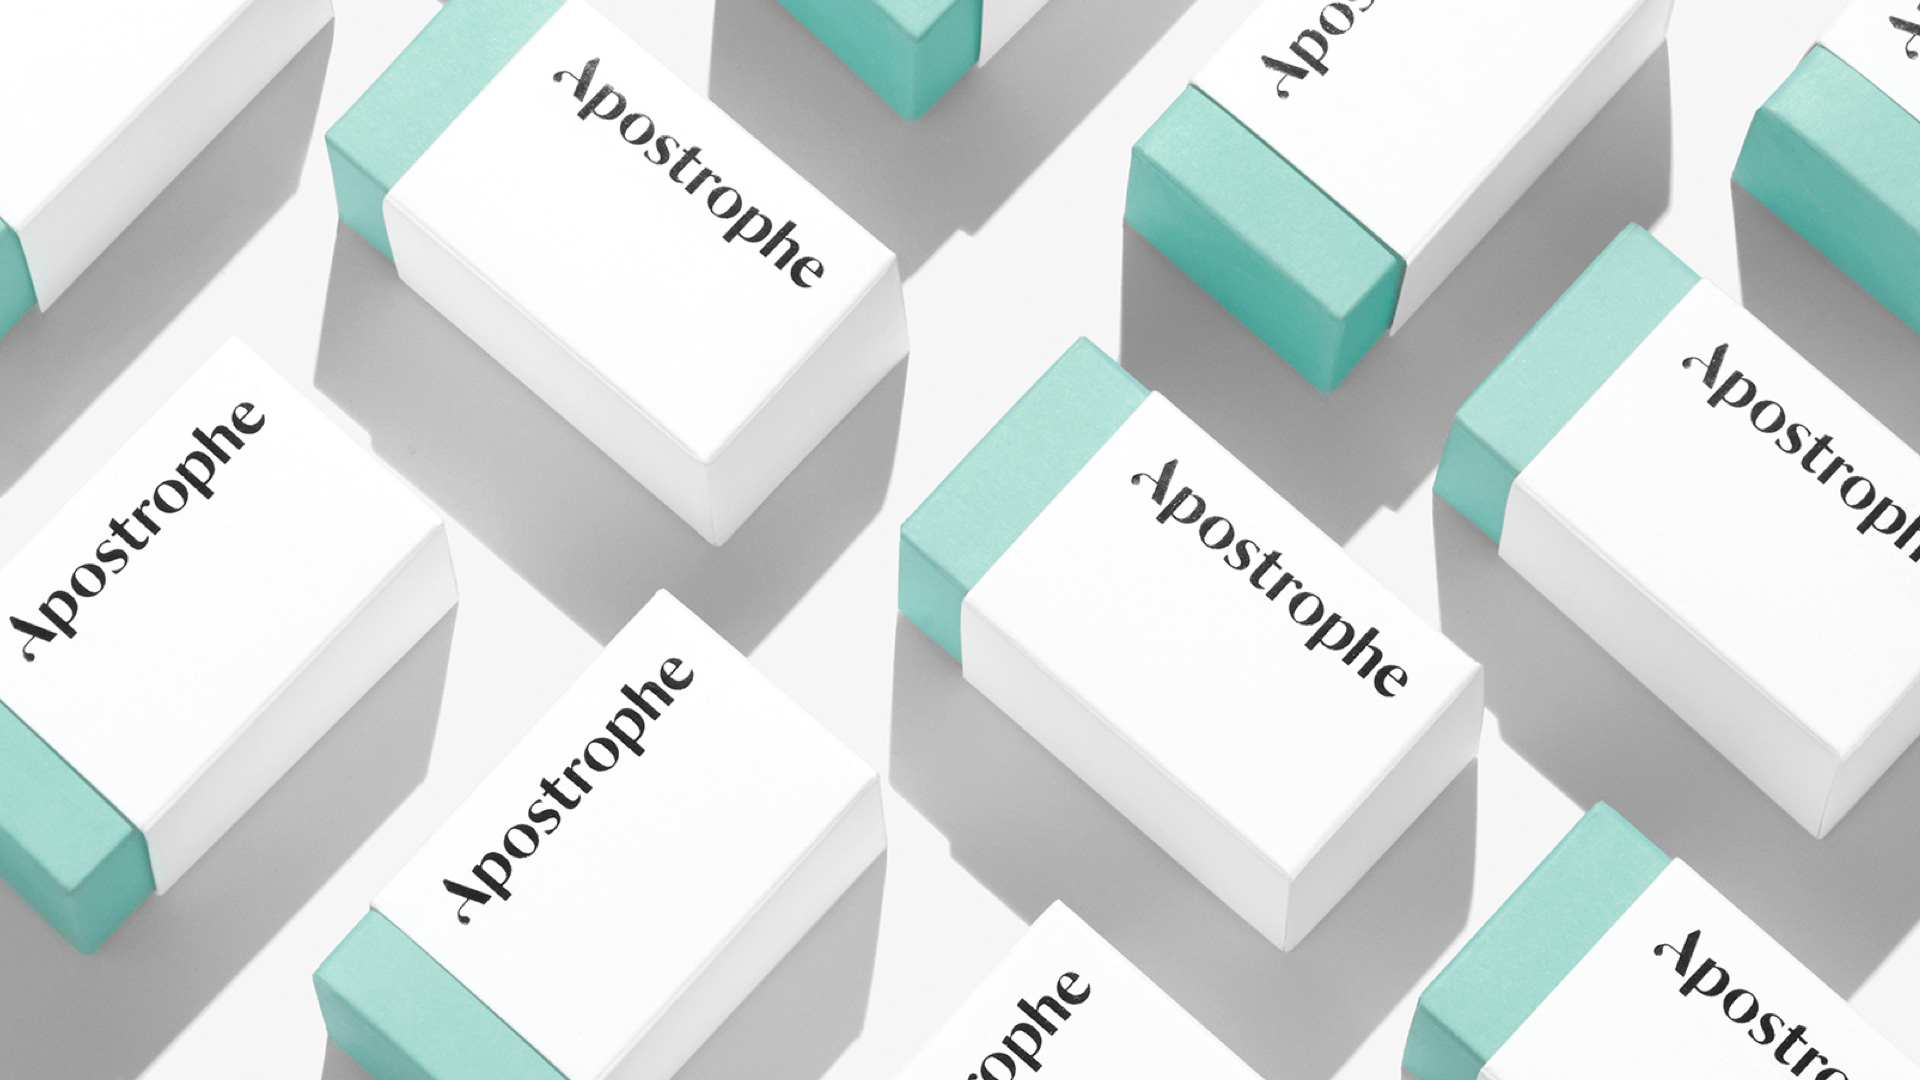 Brand New: New Name, Logo, and Identity for Apostrophe by ...
